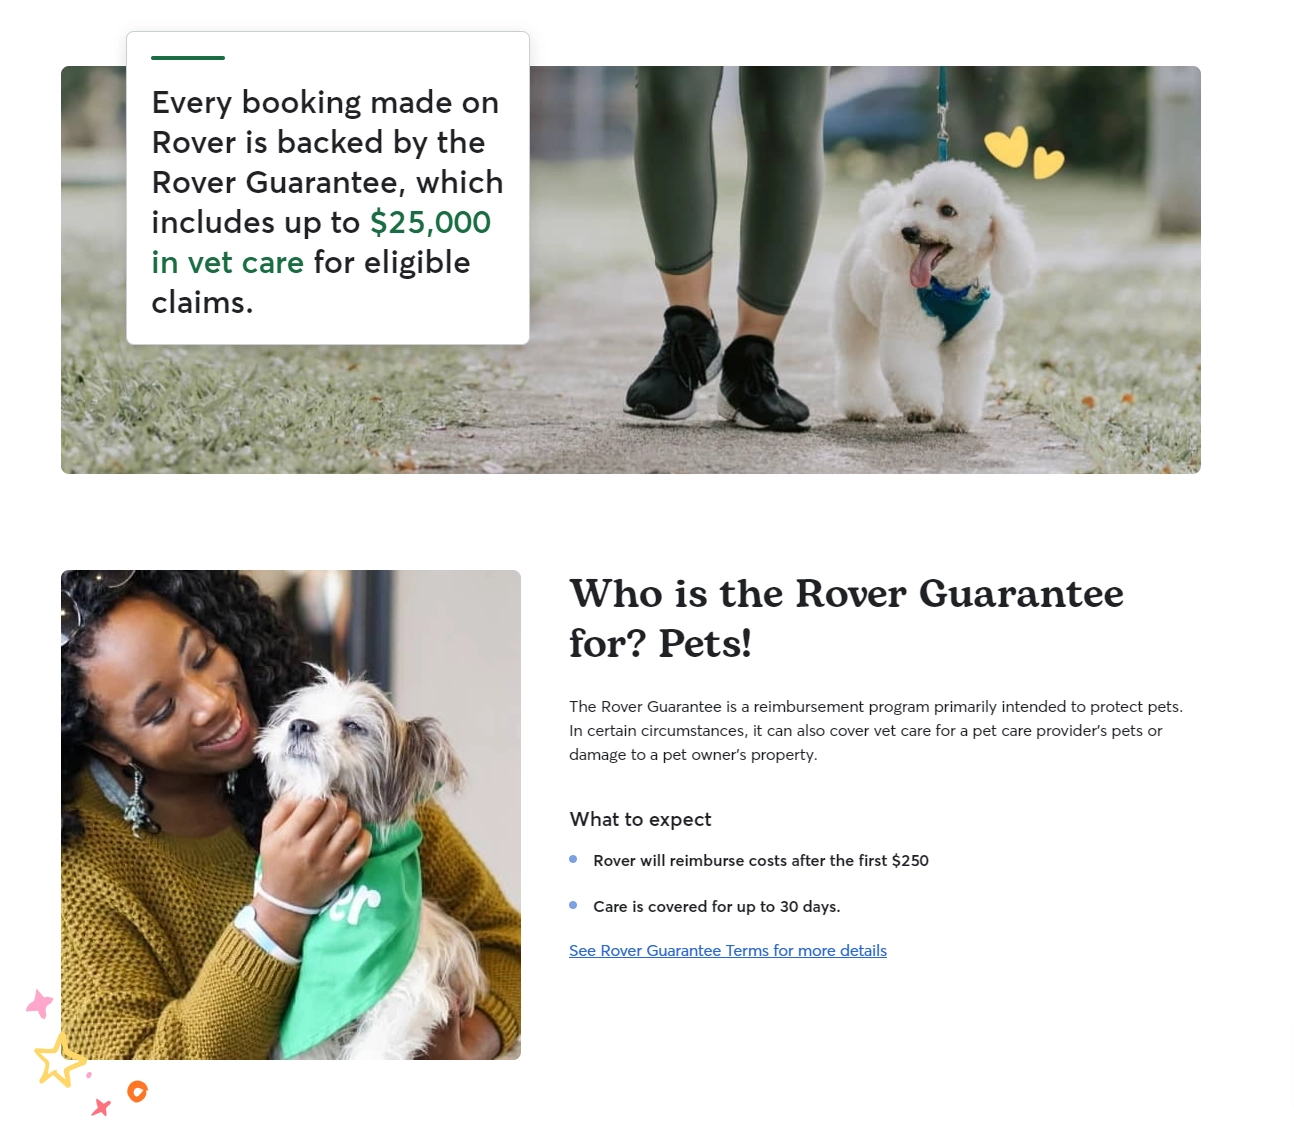 Rover Guarantee for protecting pets